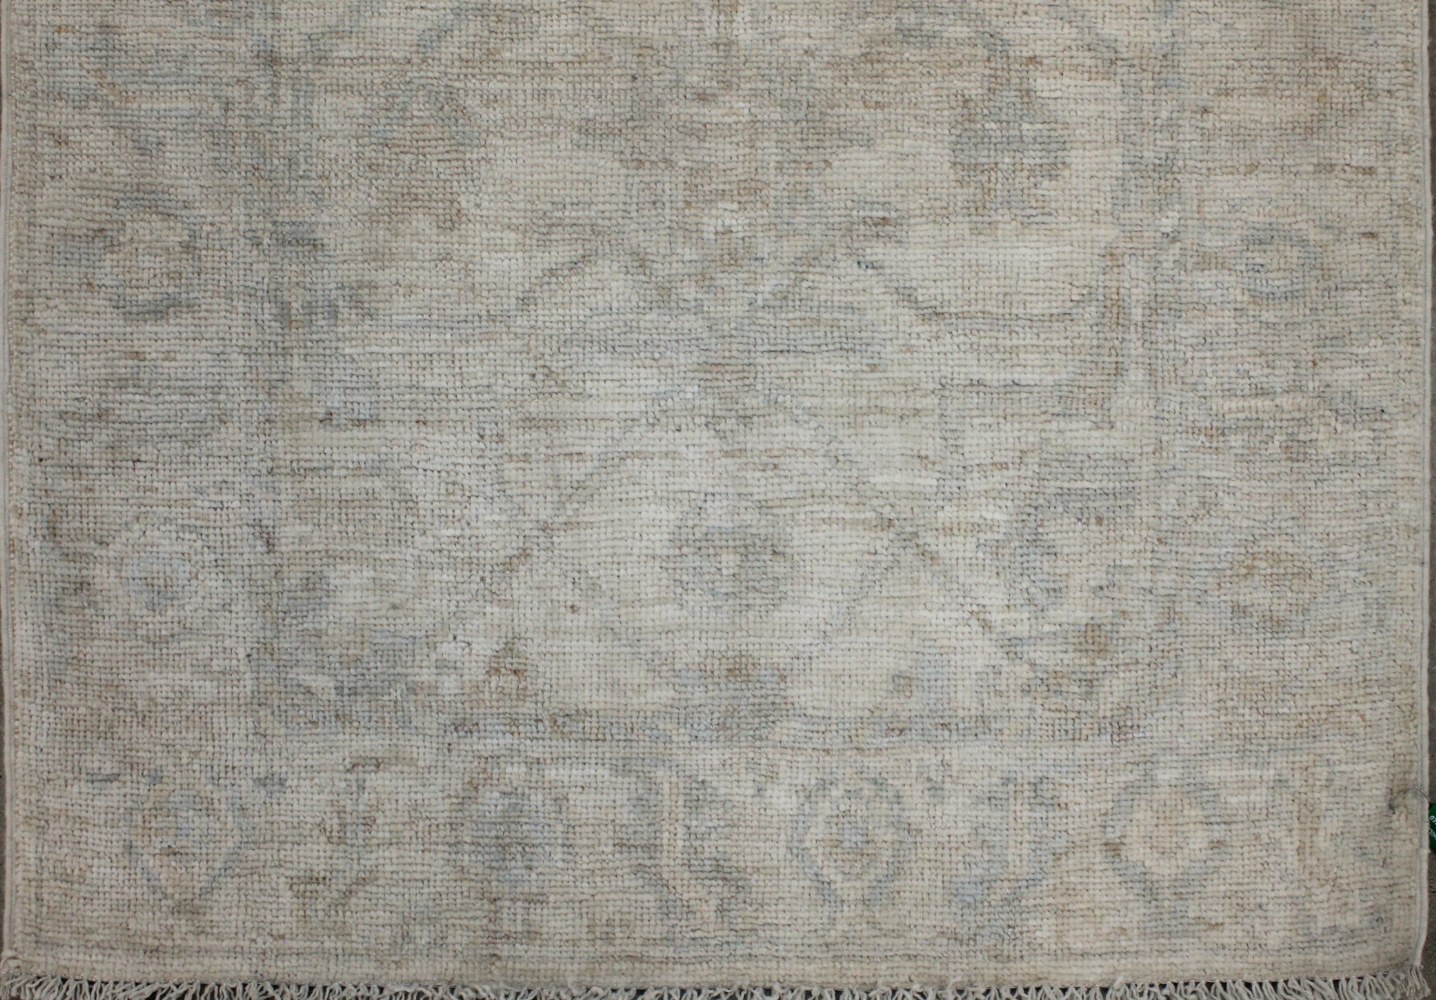 3x5 Oushak Hand Knotted Wool Area Rug - MR028813